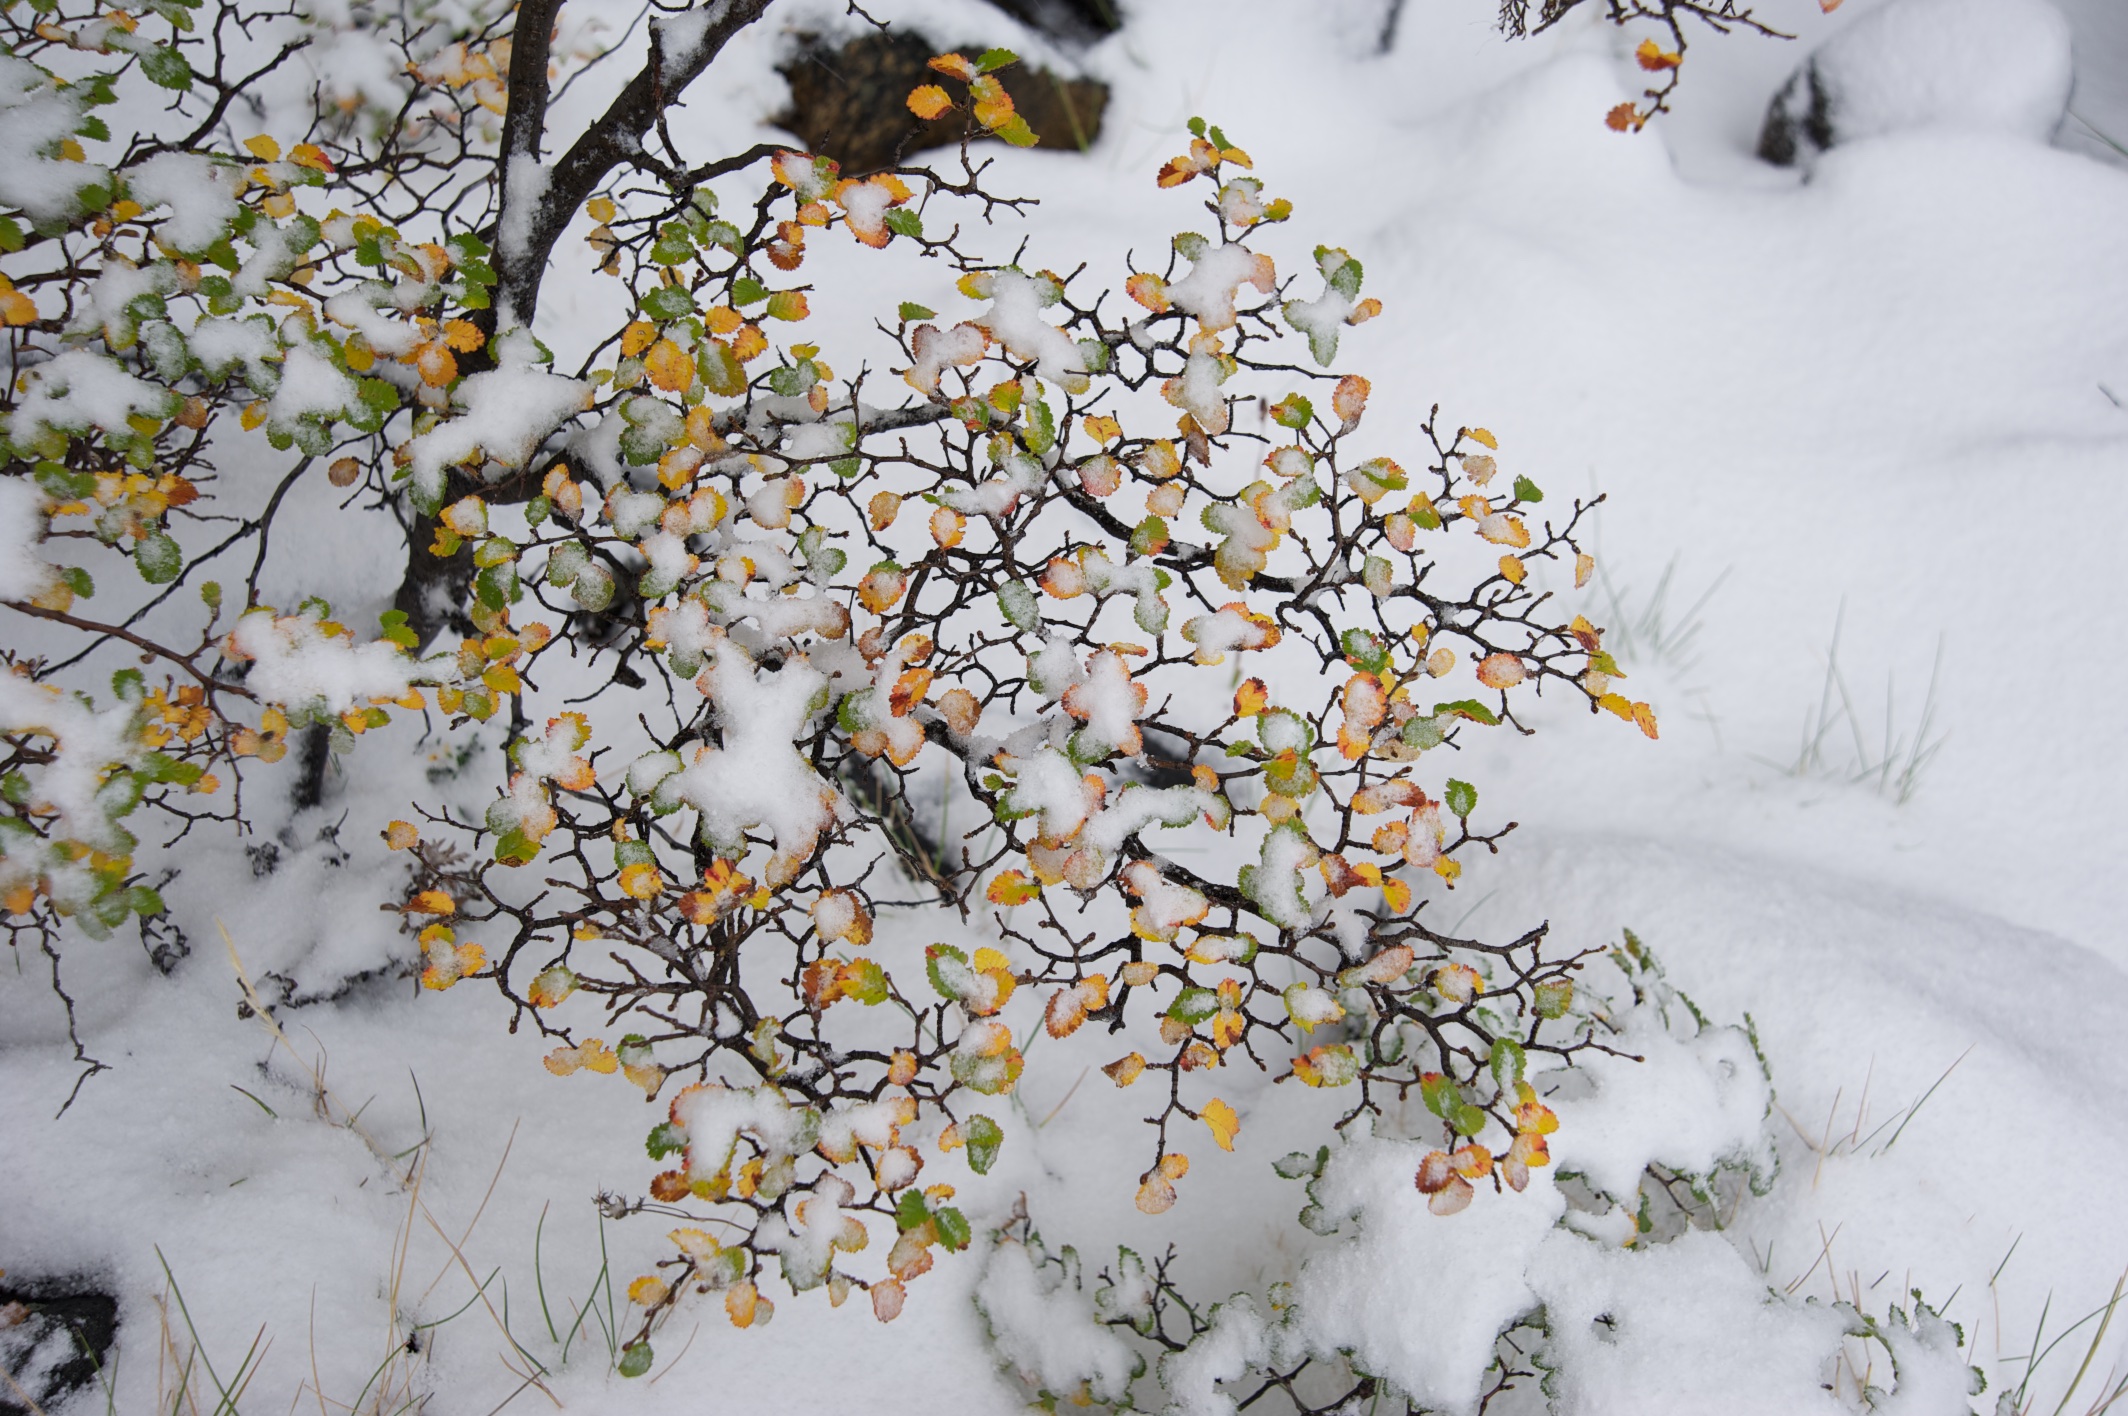  Yellow Nothafagus leaves in snow, Torres del Paine, Patagonia, Chile 